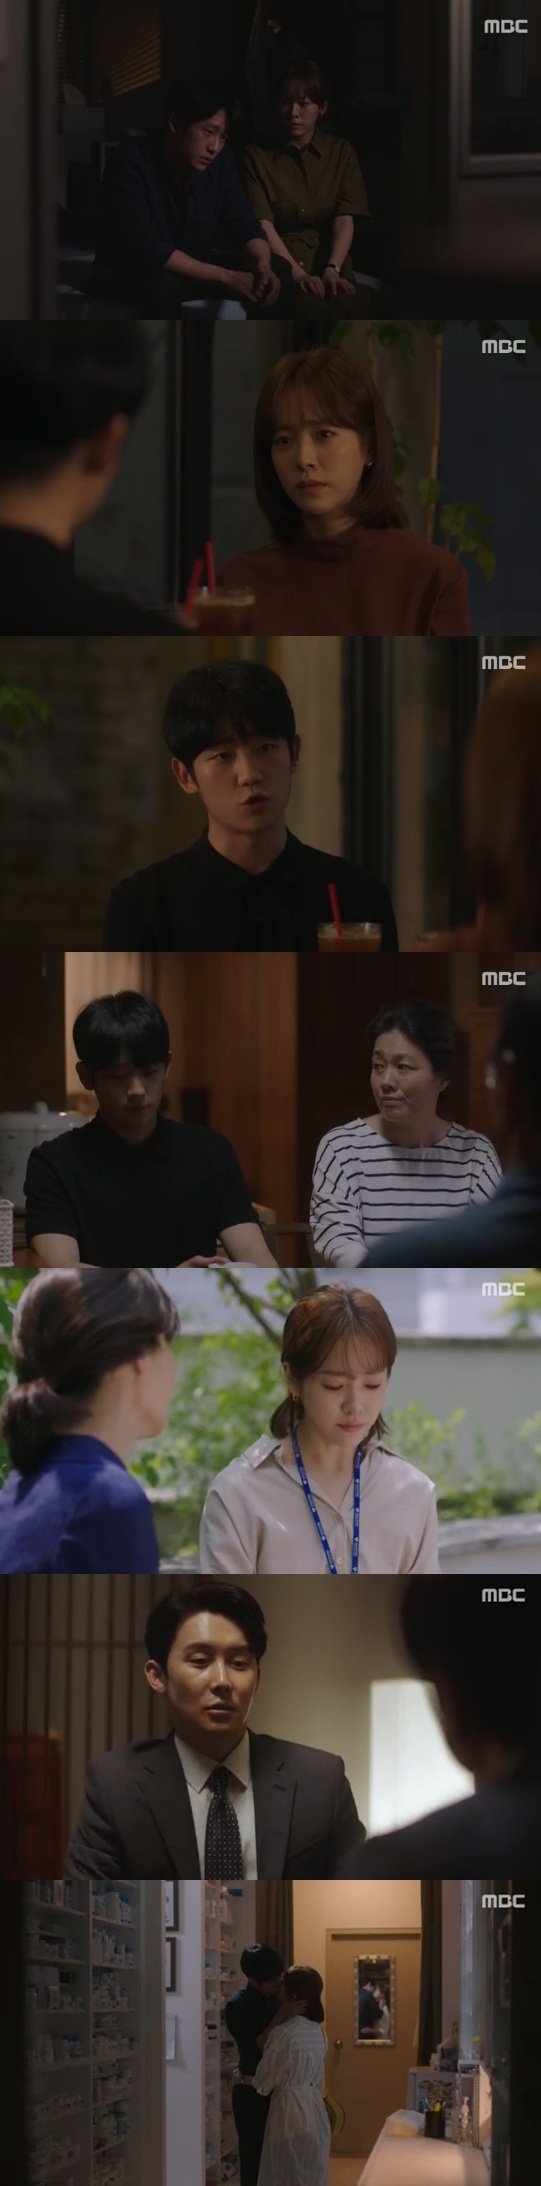 On the MBC drama Spring Night, which aired on the 10th, Jung Hae-in was portrayed as suffering after hearing the story of his son, Jung Eun-woo, about his mother.My mother was living in a family after remarriage after breaking up with Jeong Hae-in early on.Jung Hae-in, who was staying deep in his heart with the wound that was betrayed, was drunk.Then he told Han Ji-min (Lee Jung-in): Will Mr. Choi Jung-in leave us, too, can you believe it? Can I believe it?Is it changing? asked Han Ji-min, who replied that he would not change, shaking his head, saying, I dont know.Han Ji-mins thoughts became complicated by the appearance of Jung Hae-in, who was surrounded by anxiety.The next day, Han Ji-min sat face to face with his friend Lee Sang-hee (Song Young-joo) and said, I can not clean up.(Mr. JiHo said that he had not forgotten Jung Eun-woos mother yet.) He said that he believes me, but Mr. JiHo said he does not believe me.I think I was just in front of my eyes right now. The first moment of Jung Hae-ins anxiety, Han Ji-min faced reality: I betrayed the person I met and showed it to Mr. JiHo.I know that you do not believe me at all, but I am uncomfortable with you.  I think I jumped too unprepared because of my desire for Yoo JiHo.I thought that if I loved it, it could be covered. But for a while, Mr. JiHos past popped out, but my heart was still sore. I knew that my heart was still short.I confessed that I did not want to pretend to be cool. Yoo JiHo confessed to his heart again, Do not abandon us, but could not turn Han Ji-mins mind.I have a cooler.Gil Hae-yeon (Shin Hyung-sun) visited her daughter Han Ji-min and told her anecdote she met with Jung-young Kim (Ko Sook-hee). Gil Hae-yeon said, There are still many mountains to cross.Marriage is not all, it will be harder than prepared. There may be a moment of regret. He gave heartfelt advice and allowed his relationship with Jeong Hae-in.Han Ji-min showed tears.Jung-young Kim also told the story of meeting with Gil Hae-yeon and told him, I was thrilled to comfort me.Jung Hae-ins expression was also more troubled than joy.Kim Jun-ha (Kwon Gi-seok) seemed to have a chance to know that Han Ji-min was a cooler with Jeong Hae-in.Dont touch this Choi Jung-in: How do you get rid of this Choi Jung-in life?Kim Jun-ha told such a jung Hae-in, If you give up, I will give up, too. My goal is Yoo JiHo. Choi Jung-in is not a child who is satisfied with heart alone.Your cheap romance doesnt fit in with this Choi Jung-in at all, and Im so sorry for you, youre so sorry, you cant see the future.He said that the child problem could be a fatal disadvantage and strength. What do you do with illegally filming me and my son?I even said that my father did it, but I did not fall because I was not sick. I dared touch my child.Their love was solid. Han Ji-min went to the settlement first, mischievously conveyed his heart, and made the ending with a bold kiss.